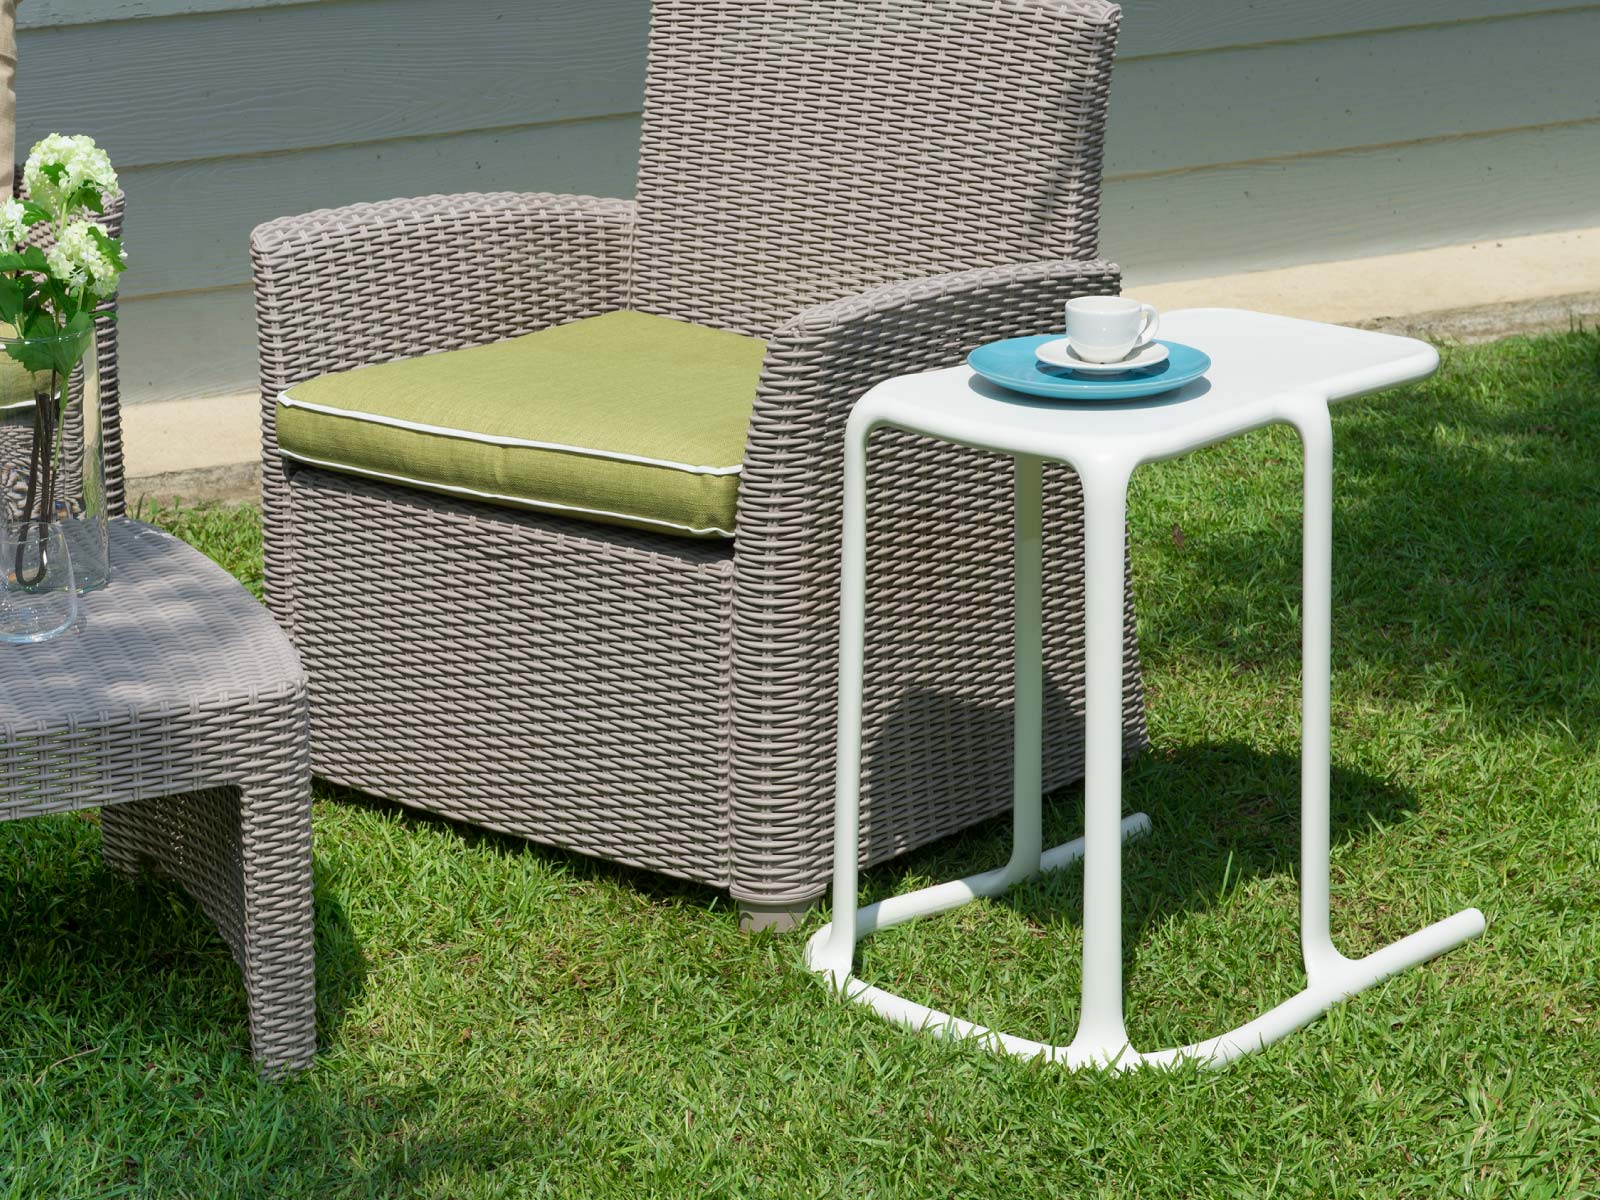 7095-PT-01 Uno Side Table can be used both indoors or outdoors.